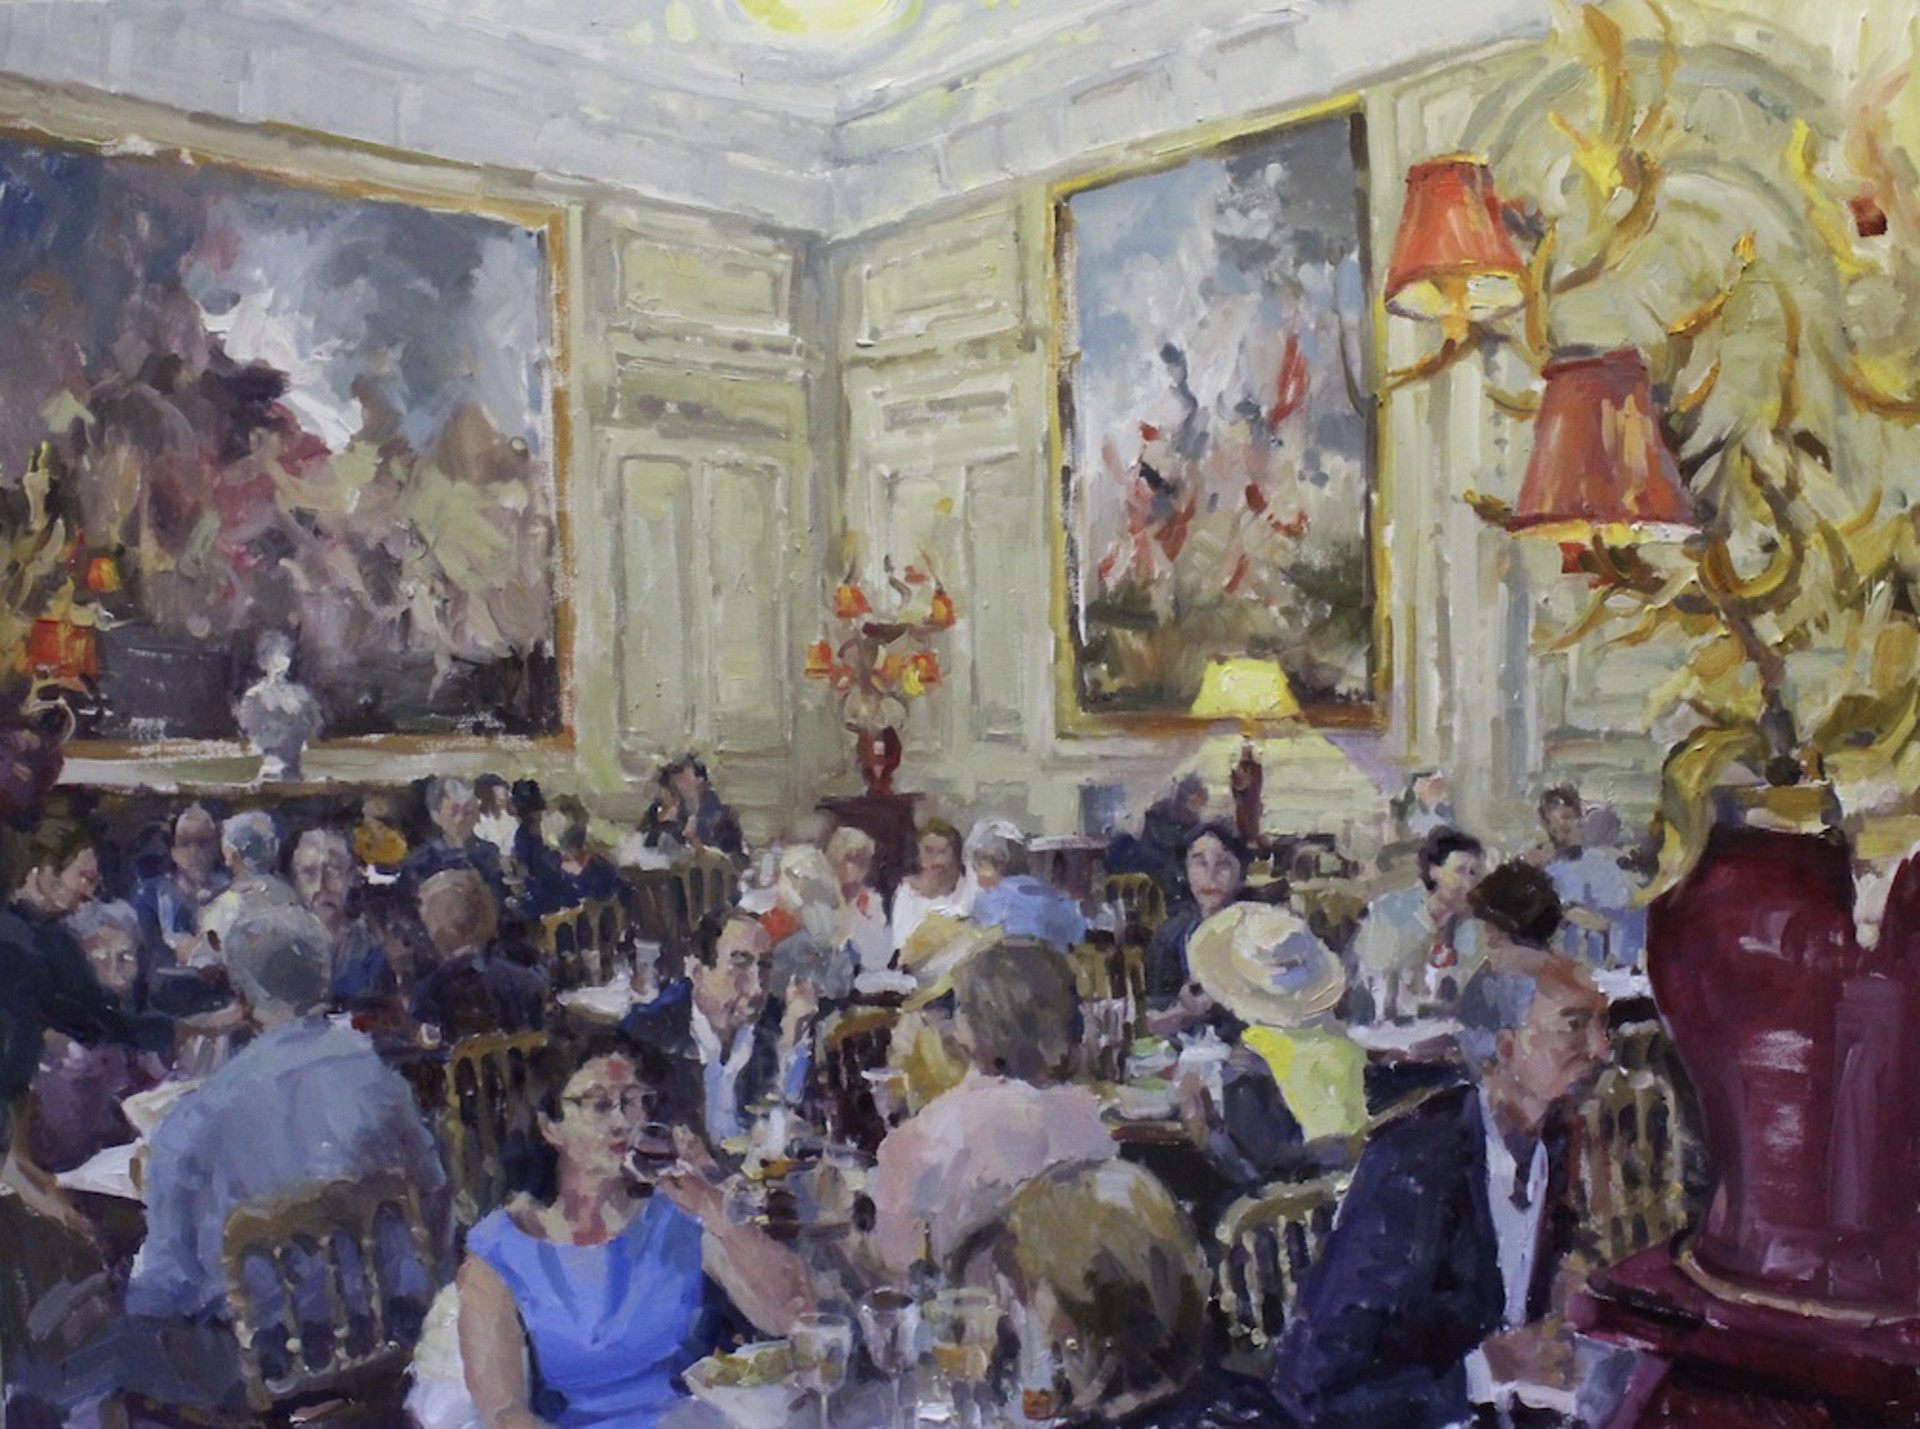 Brunch at Musee Jacquemart-Andre by Brent Jensen